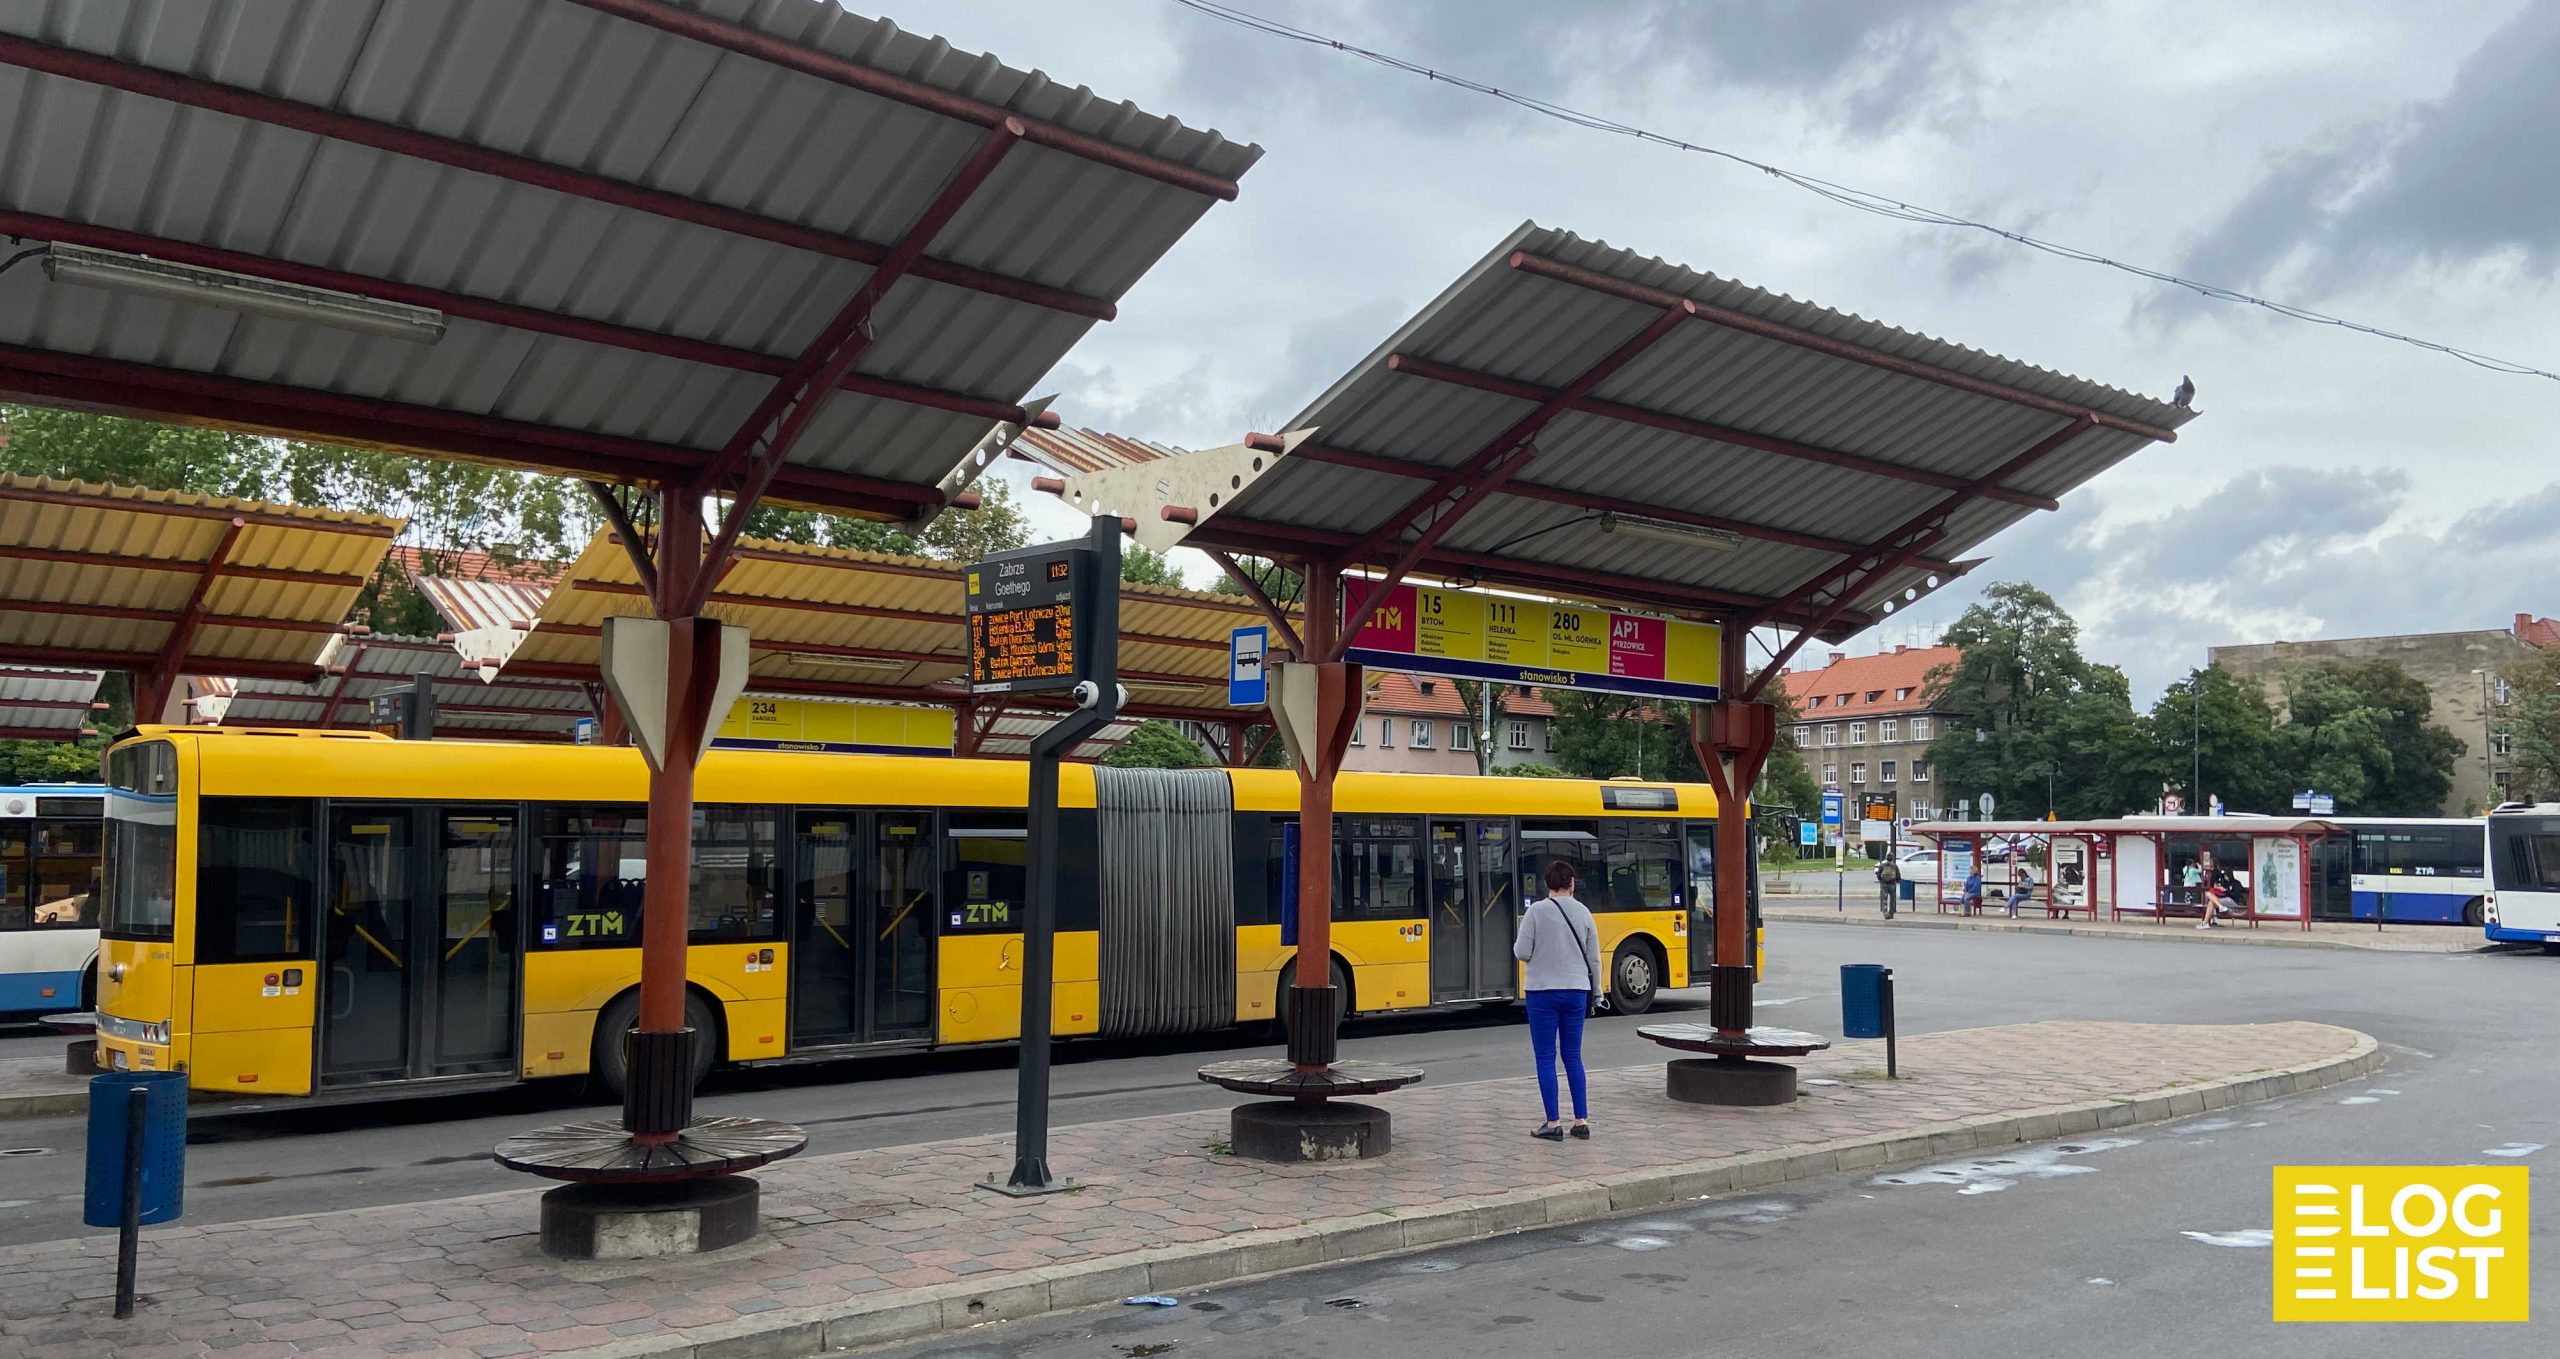 [Zabrze] Train and Bus station – before